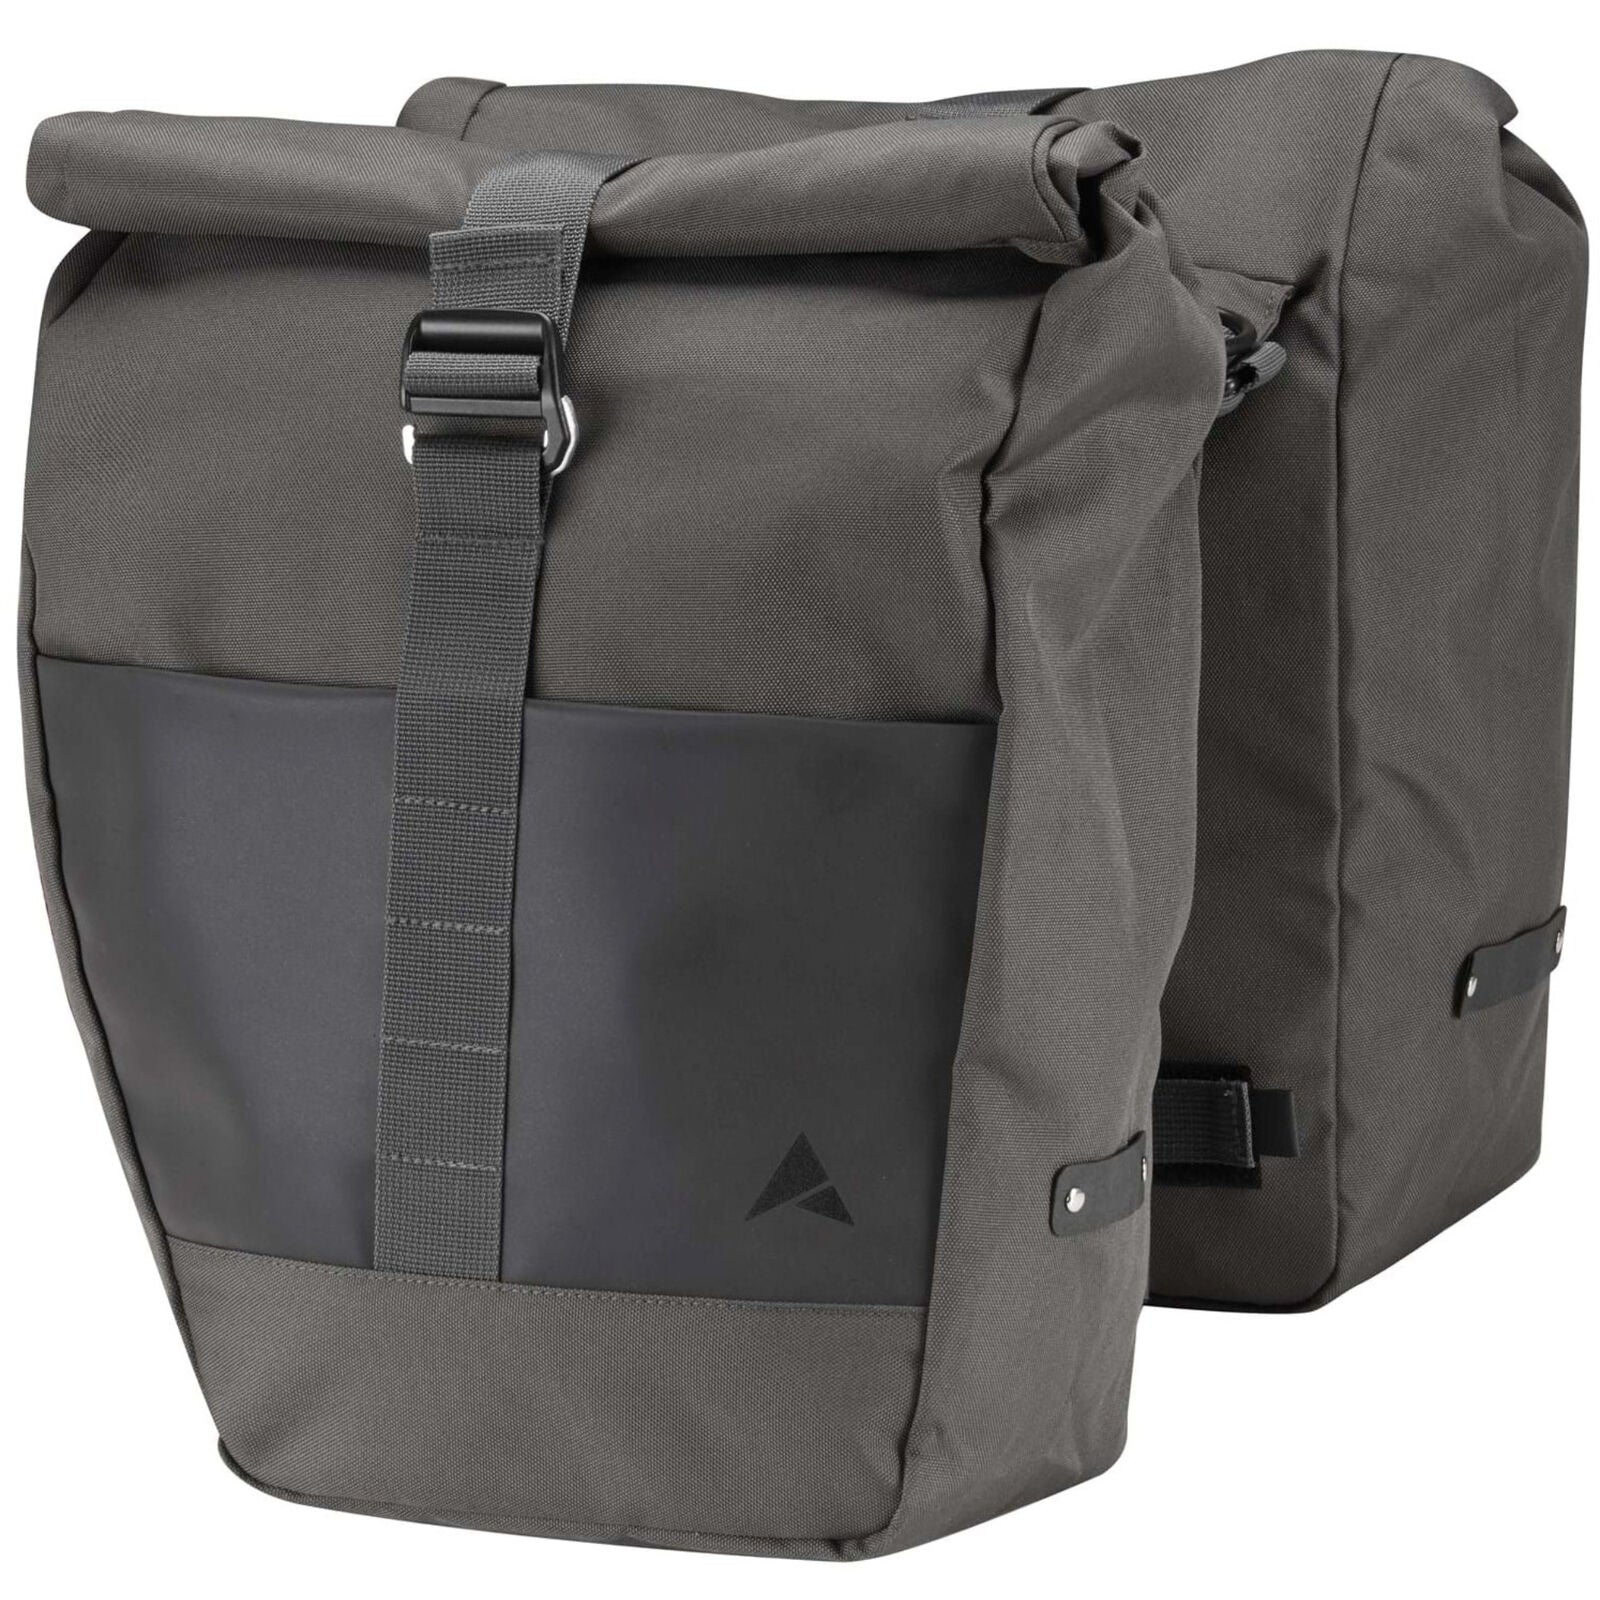 Altura Grid Cycling Pannier Roll Up Pair, versatile and packable panniers with 15L capacity each side. Roll-up design, roll-top closure, grab handle, reflective details, and DWR finish. Ideal for commuting, touring, and bike packing. Compact storage when not in use.